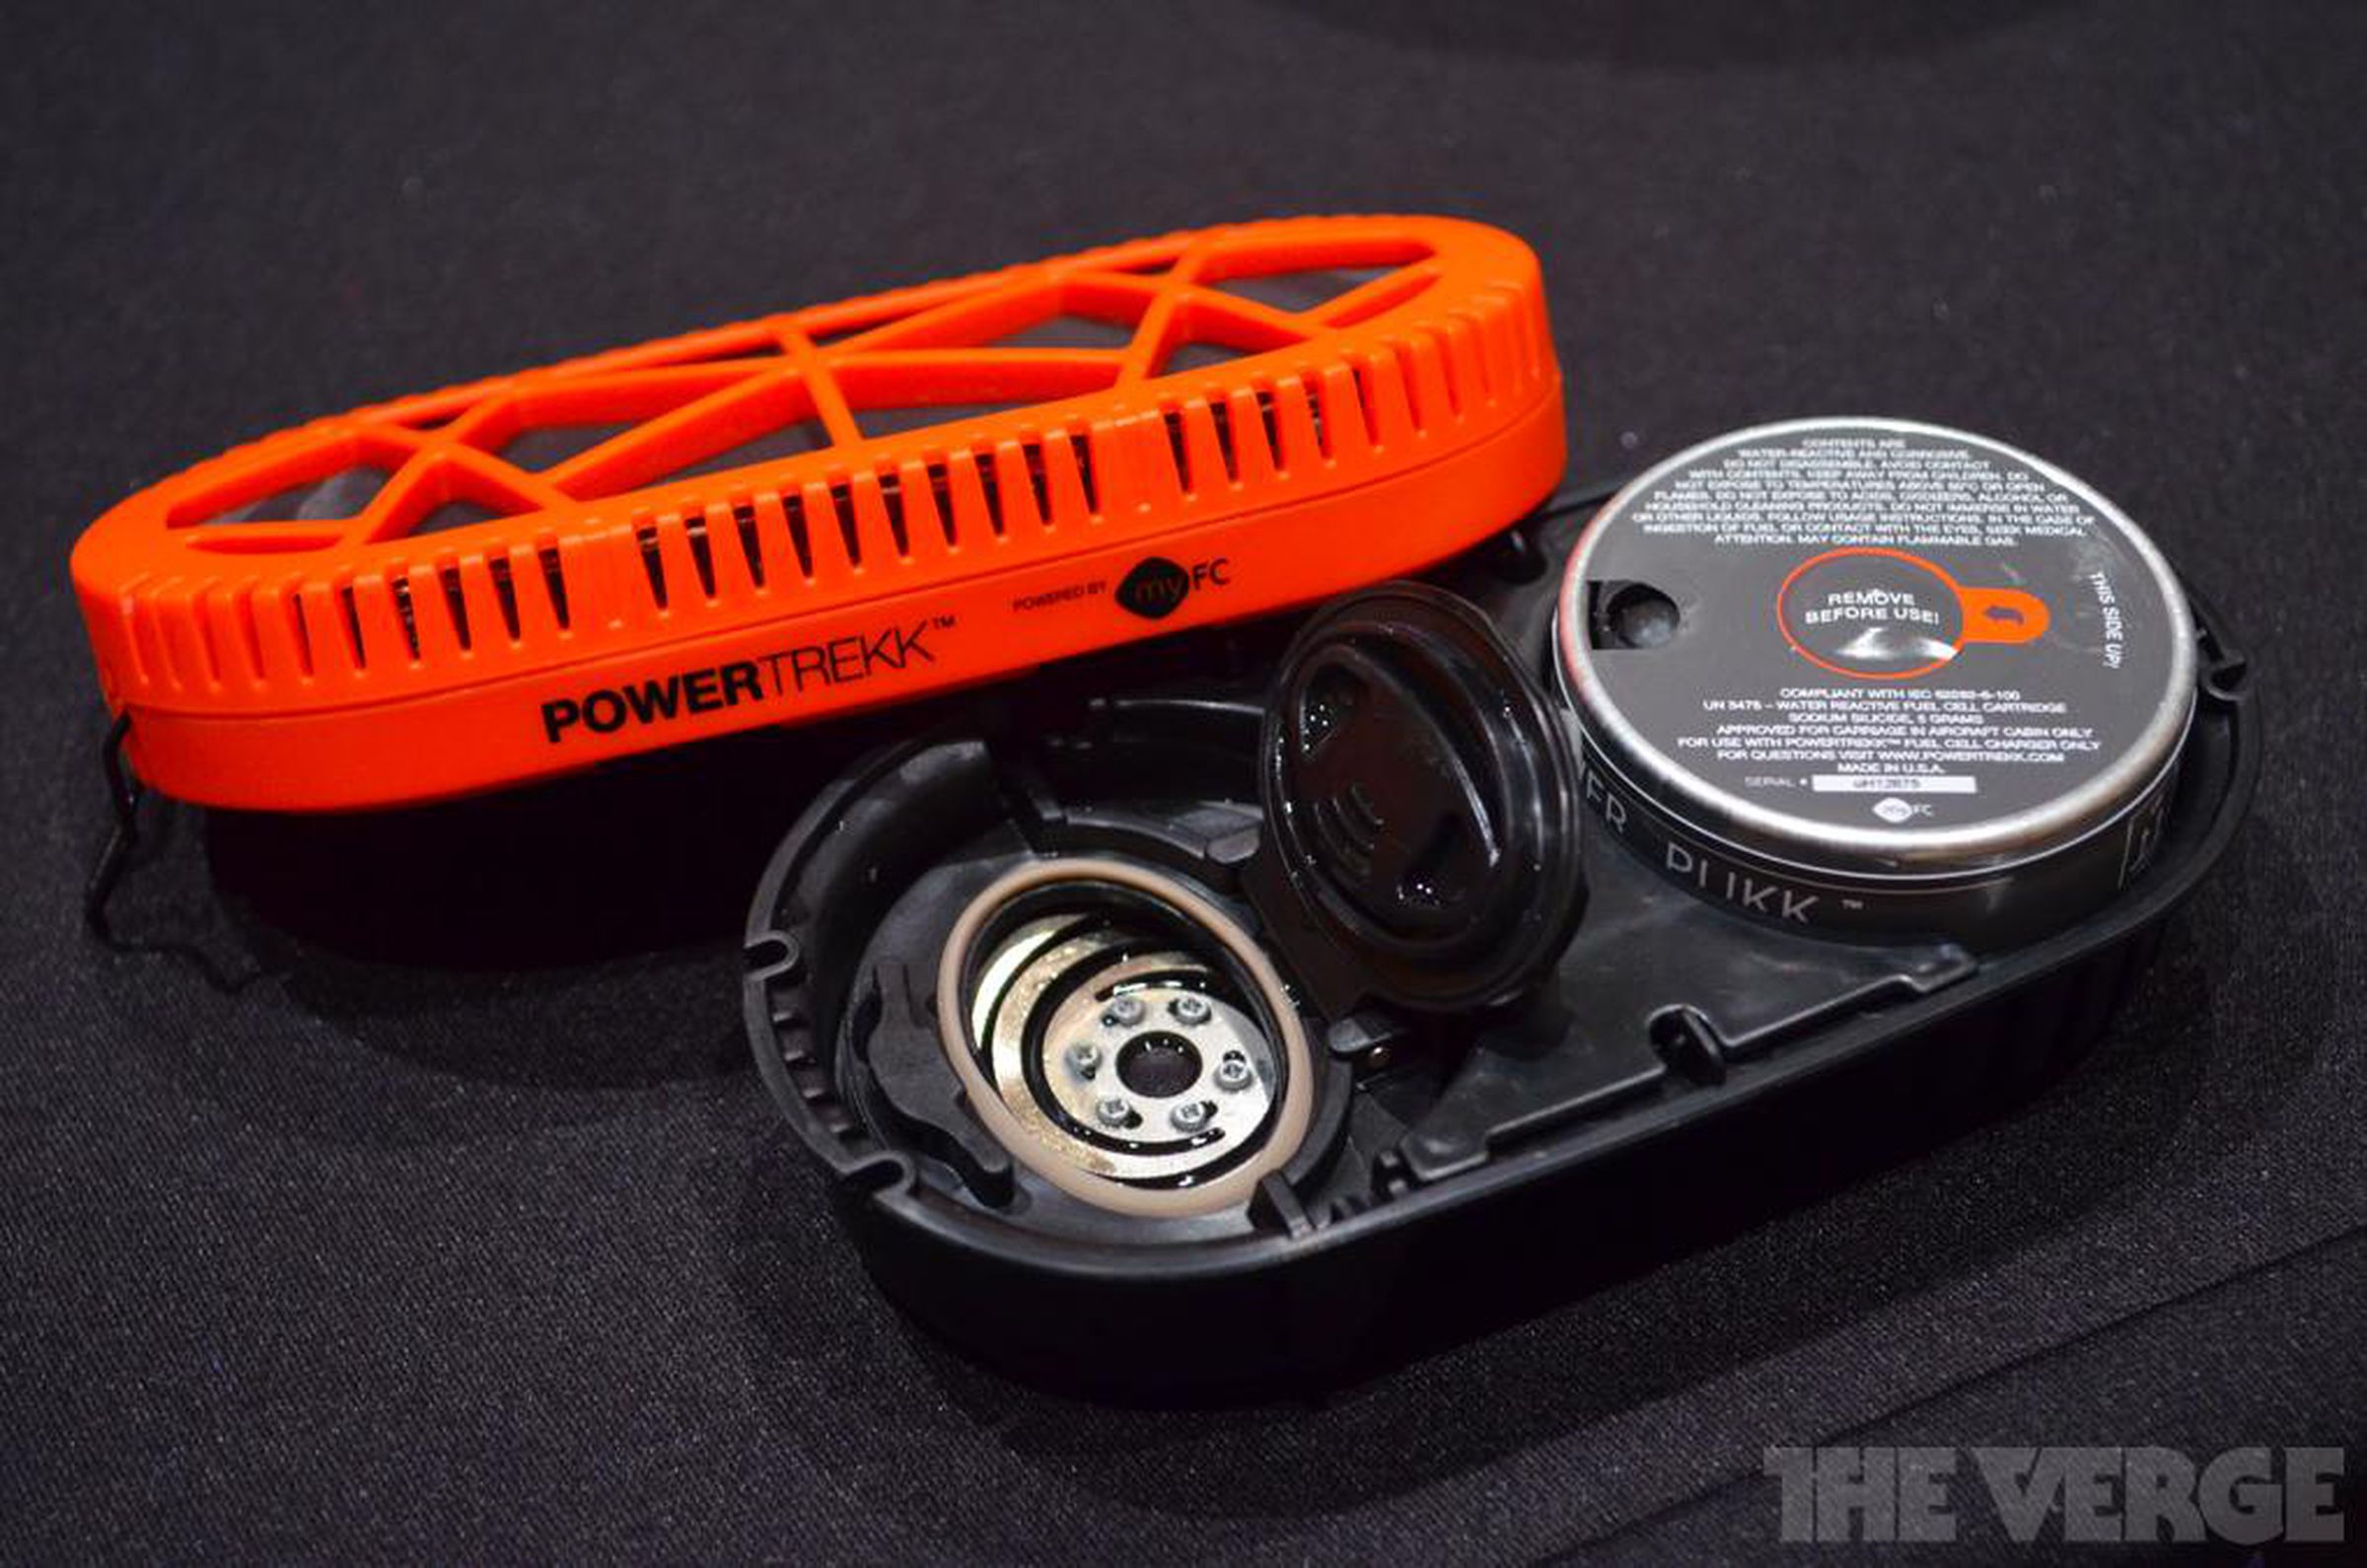 PowerTrekk mobile fuel cell hands-on pictures